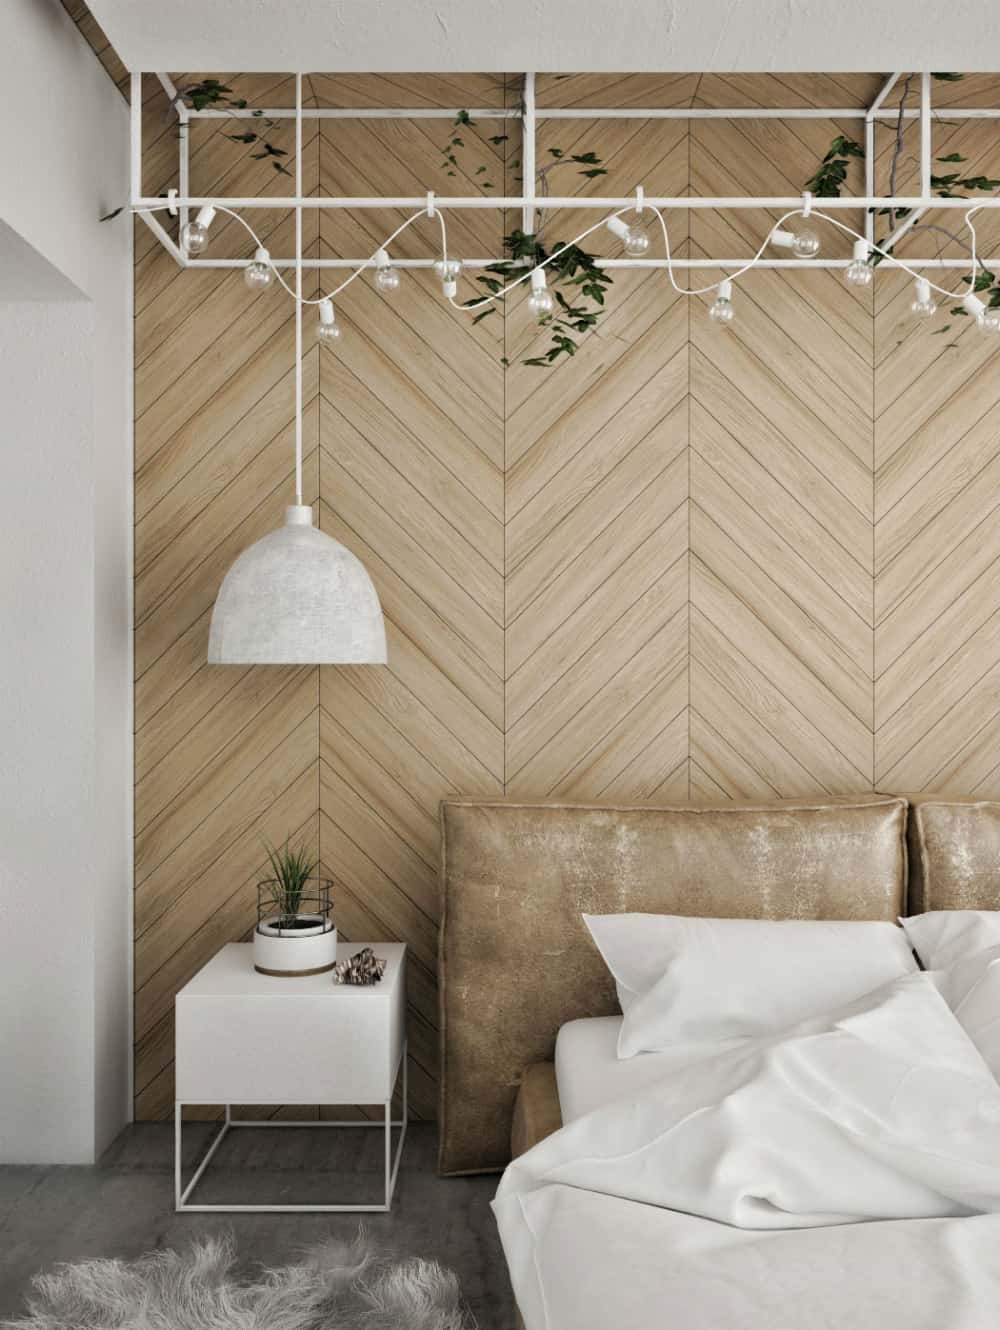 Headboard wall features wooden chevron panelling